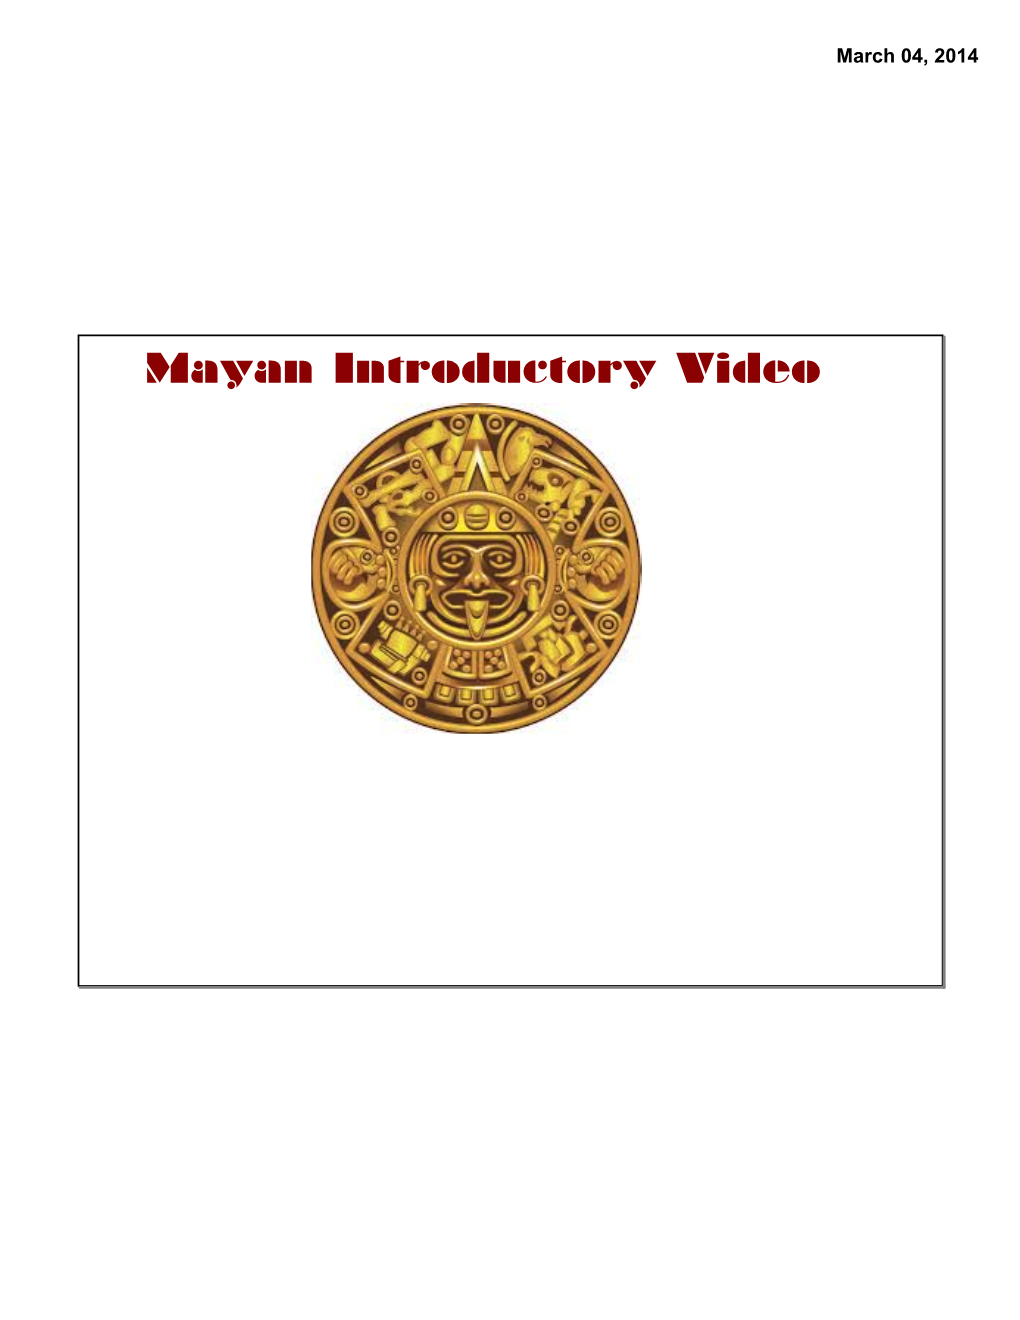 Mayan Introductory Video March 04, 2014